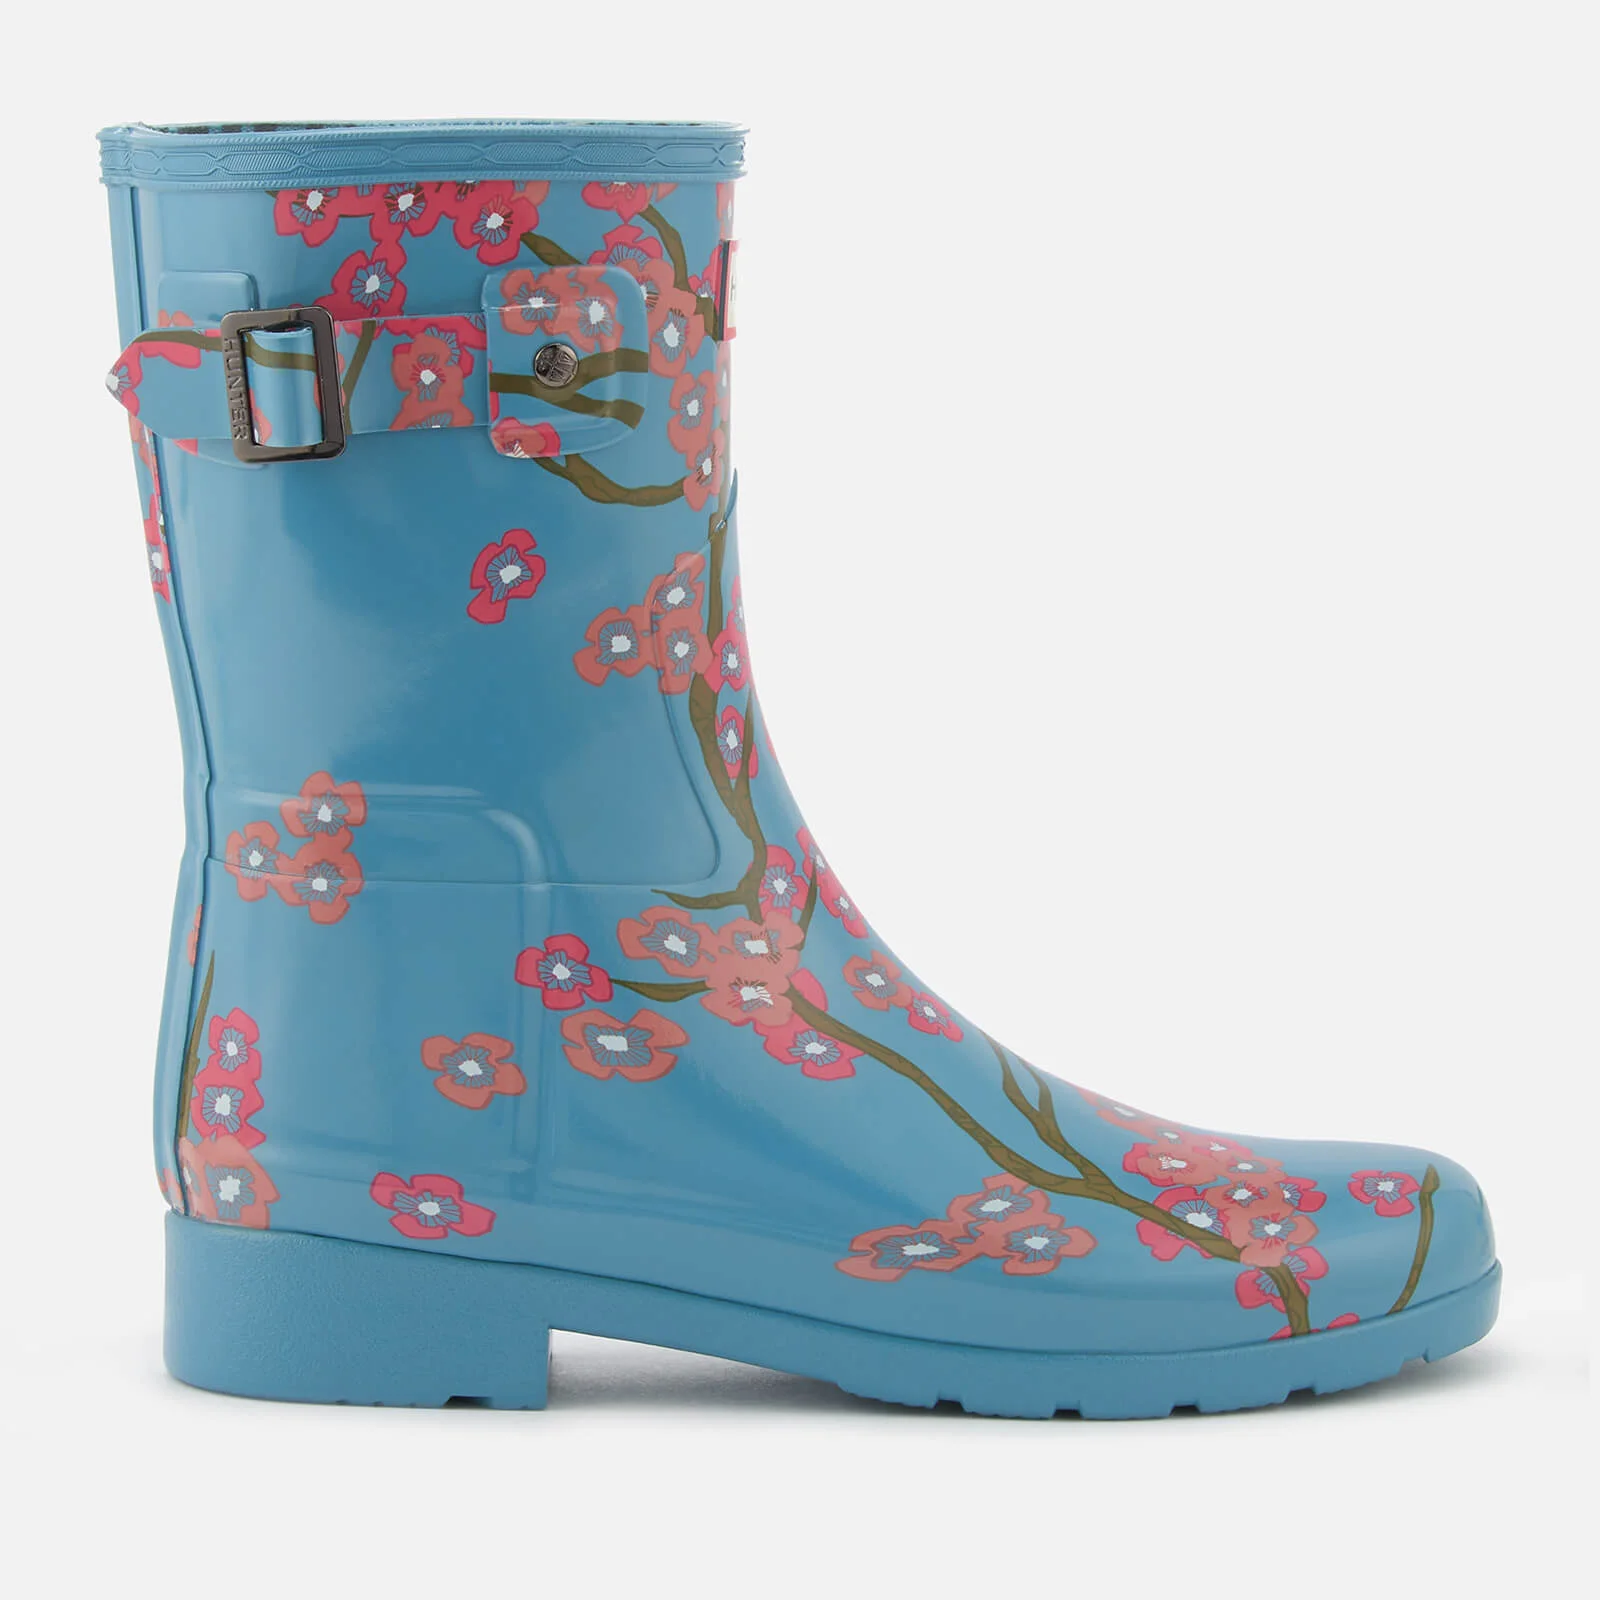 Hunter Women's Refined Blossom Print Short Wellies - Soft Pine Floral Image 1